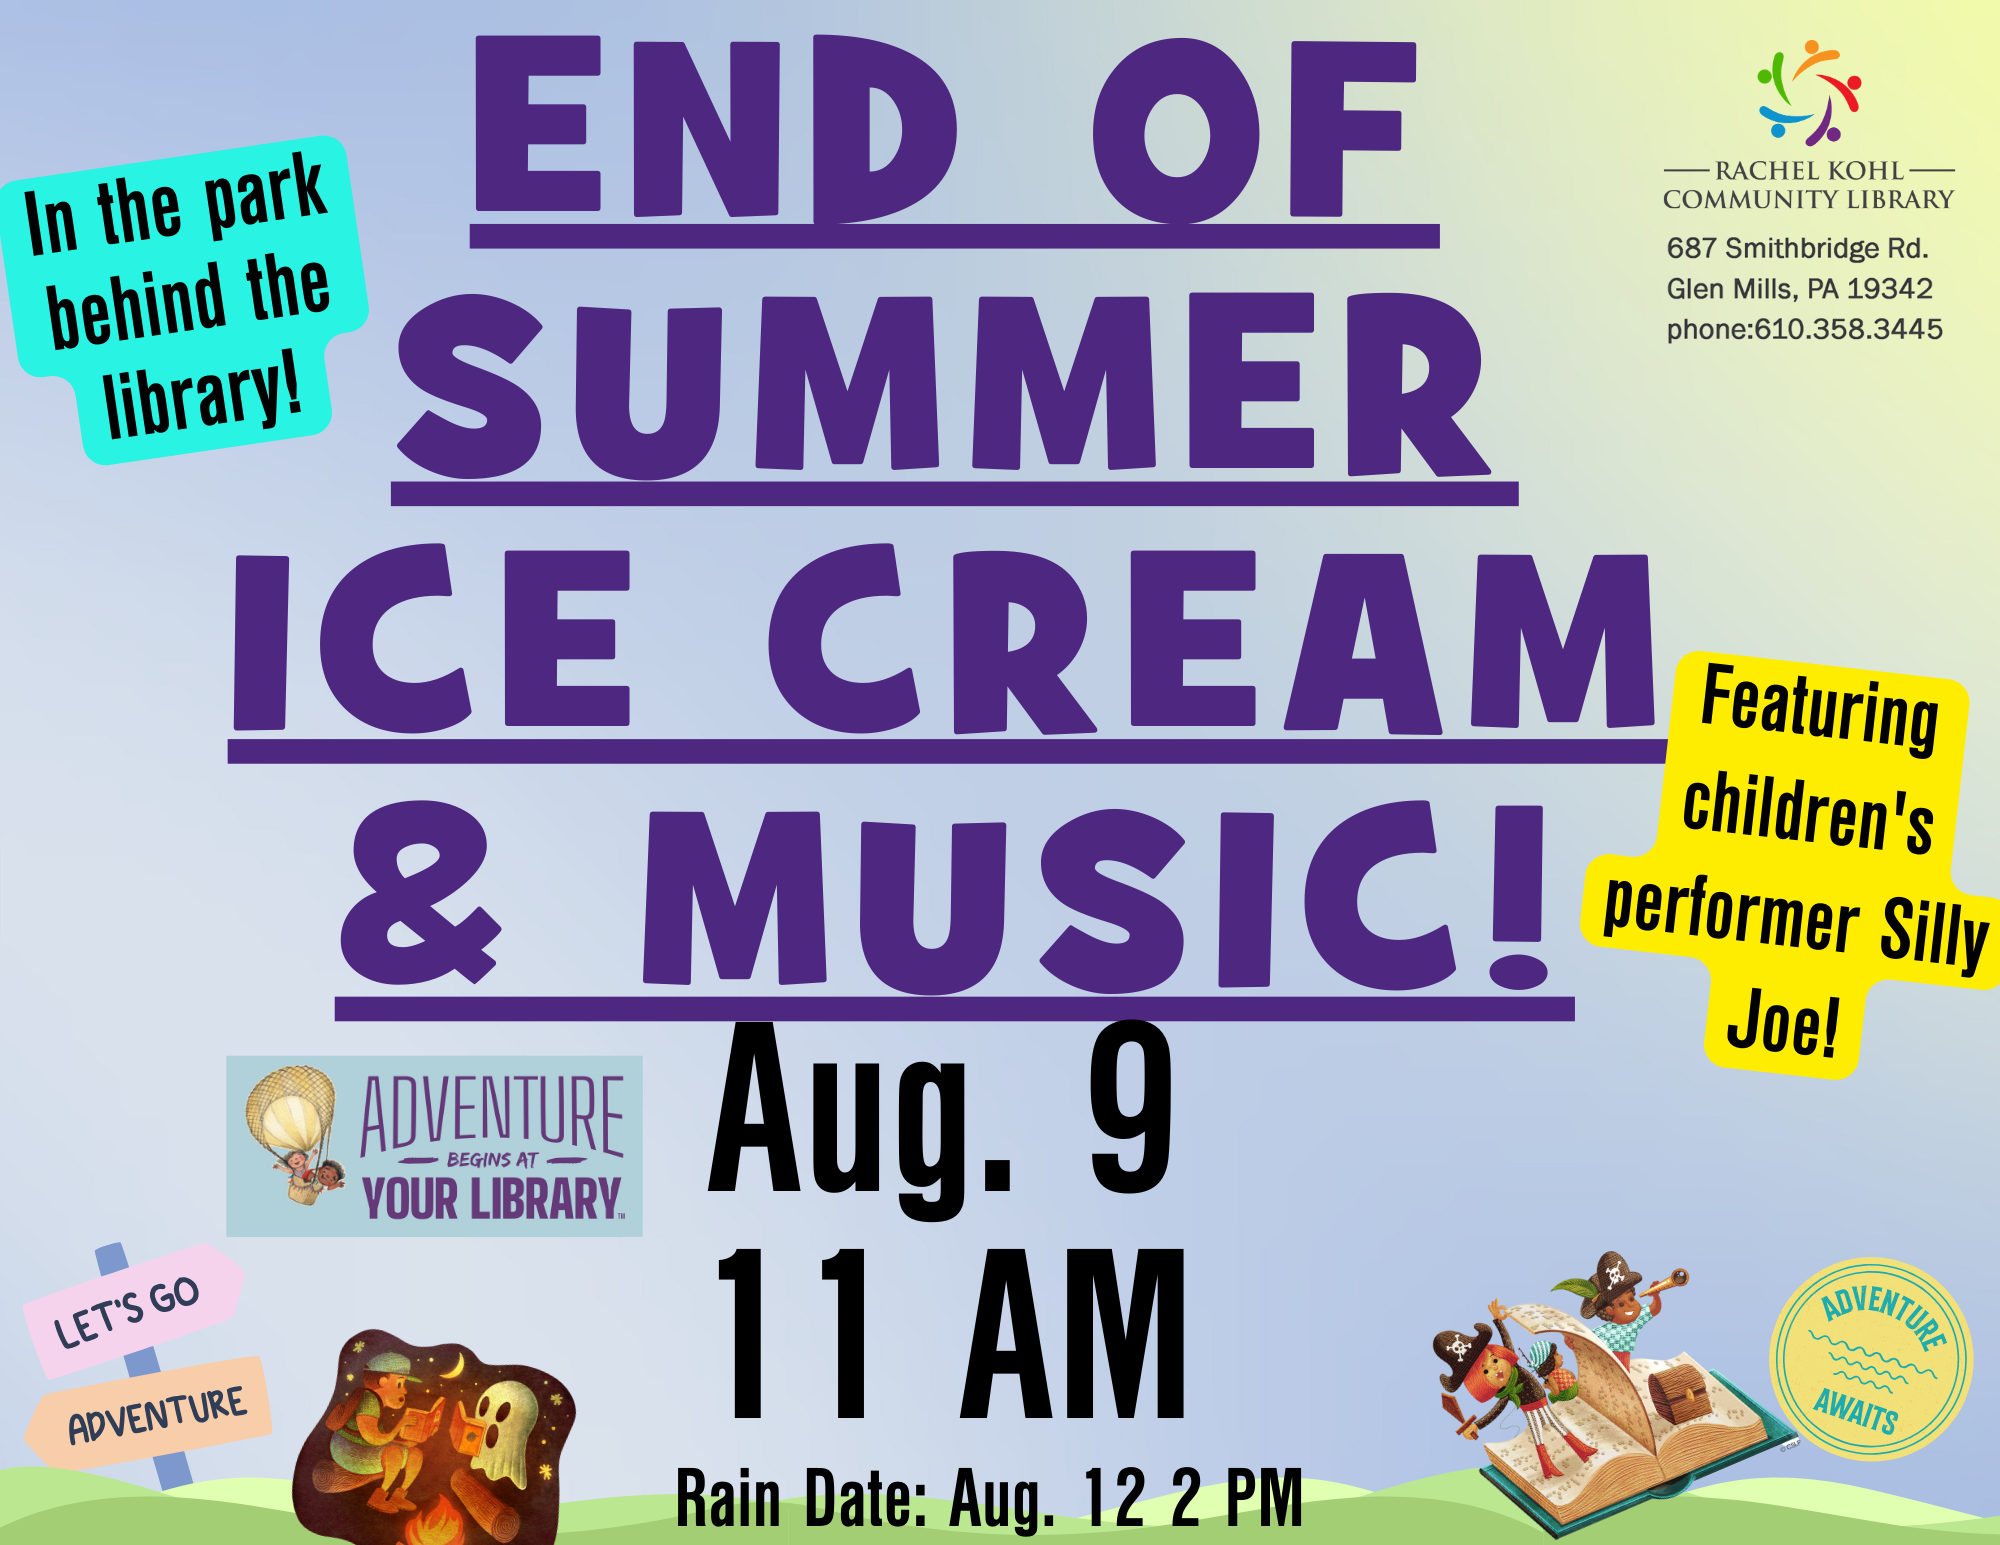 End of Summer Ice Cream & Music Aug 9 11 AM Rain Date: Aug. 12 2 PM. In the Park Behind the Library, featuring children's performer Silly Joe!